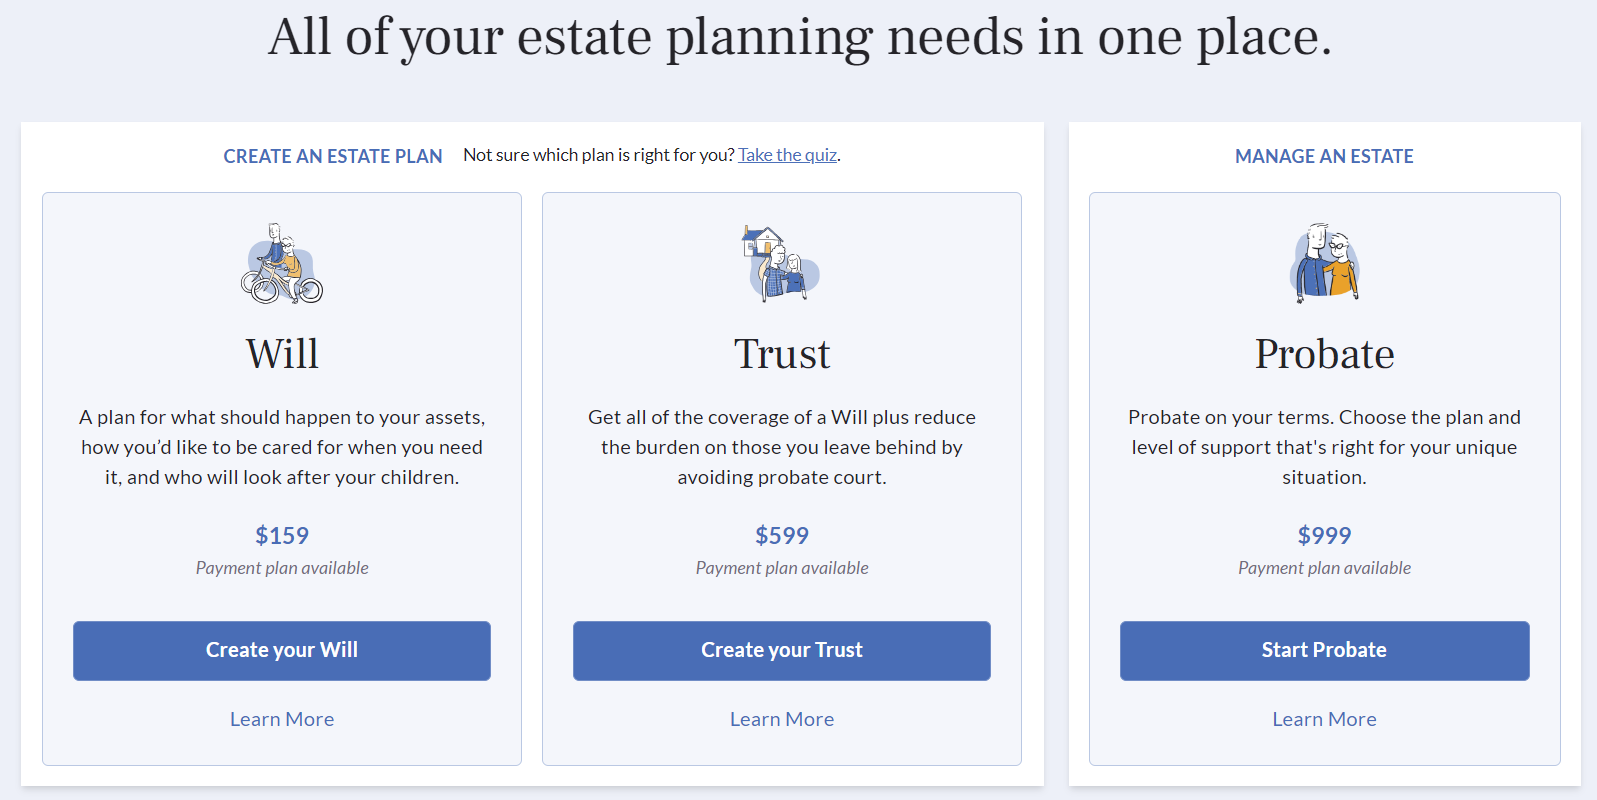 Estate planning options from Trust & Will, including create your will, create you trust and start probate to manage an estate